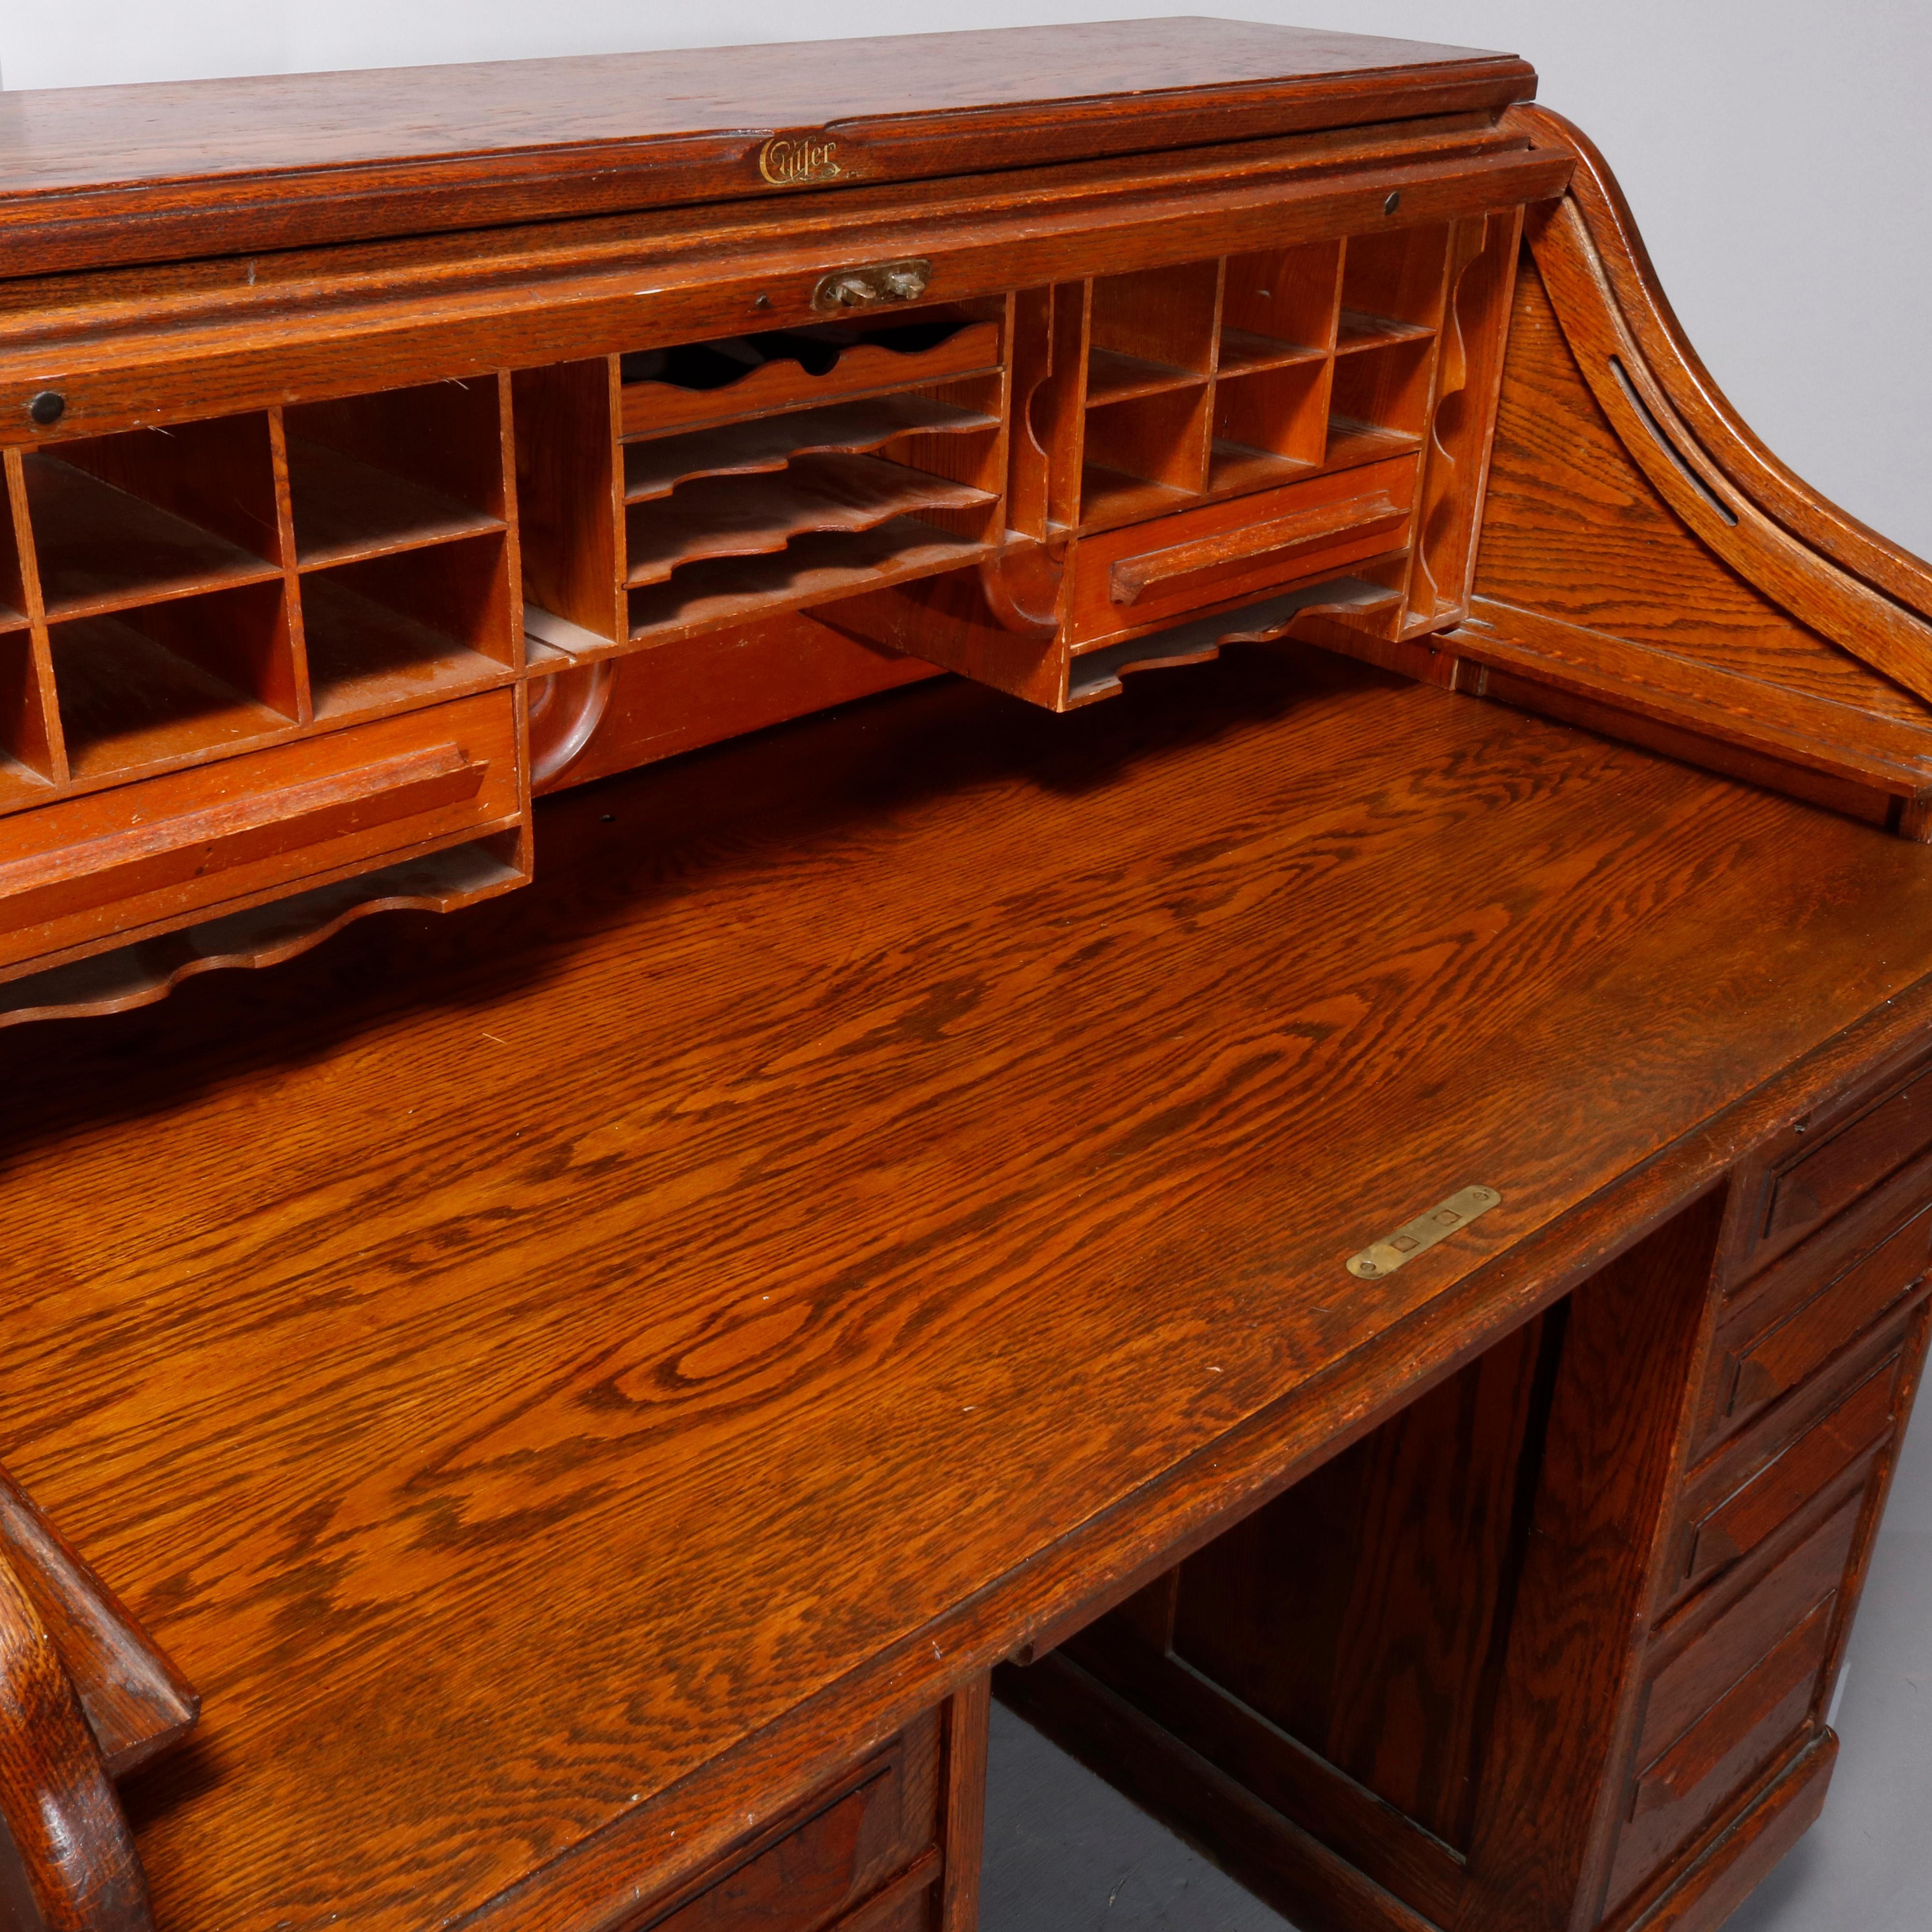 Antique desk by Cutler Desk Factory, Buffalo, NY in the manner of Derby features quarter sawn oak construction with S-form roll top opening to interior pigeon holes and drawers; paneled sides and back; flanking drawer towers, circa